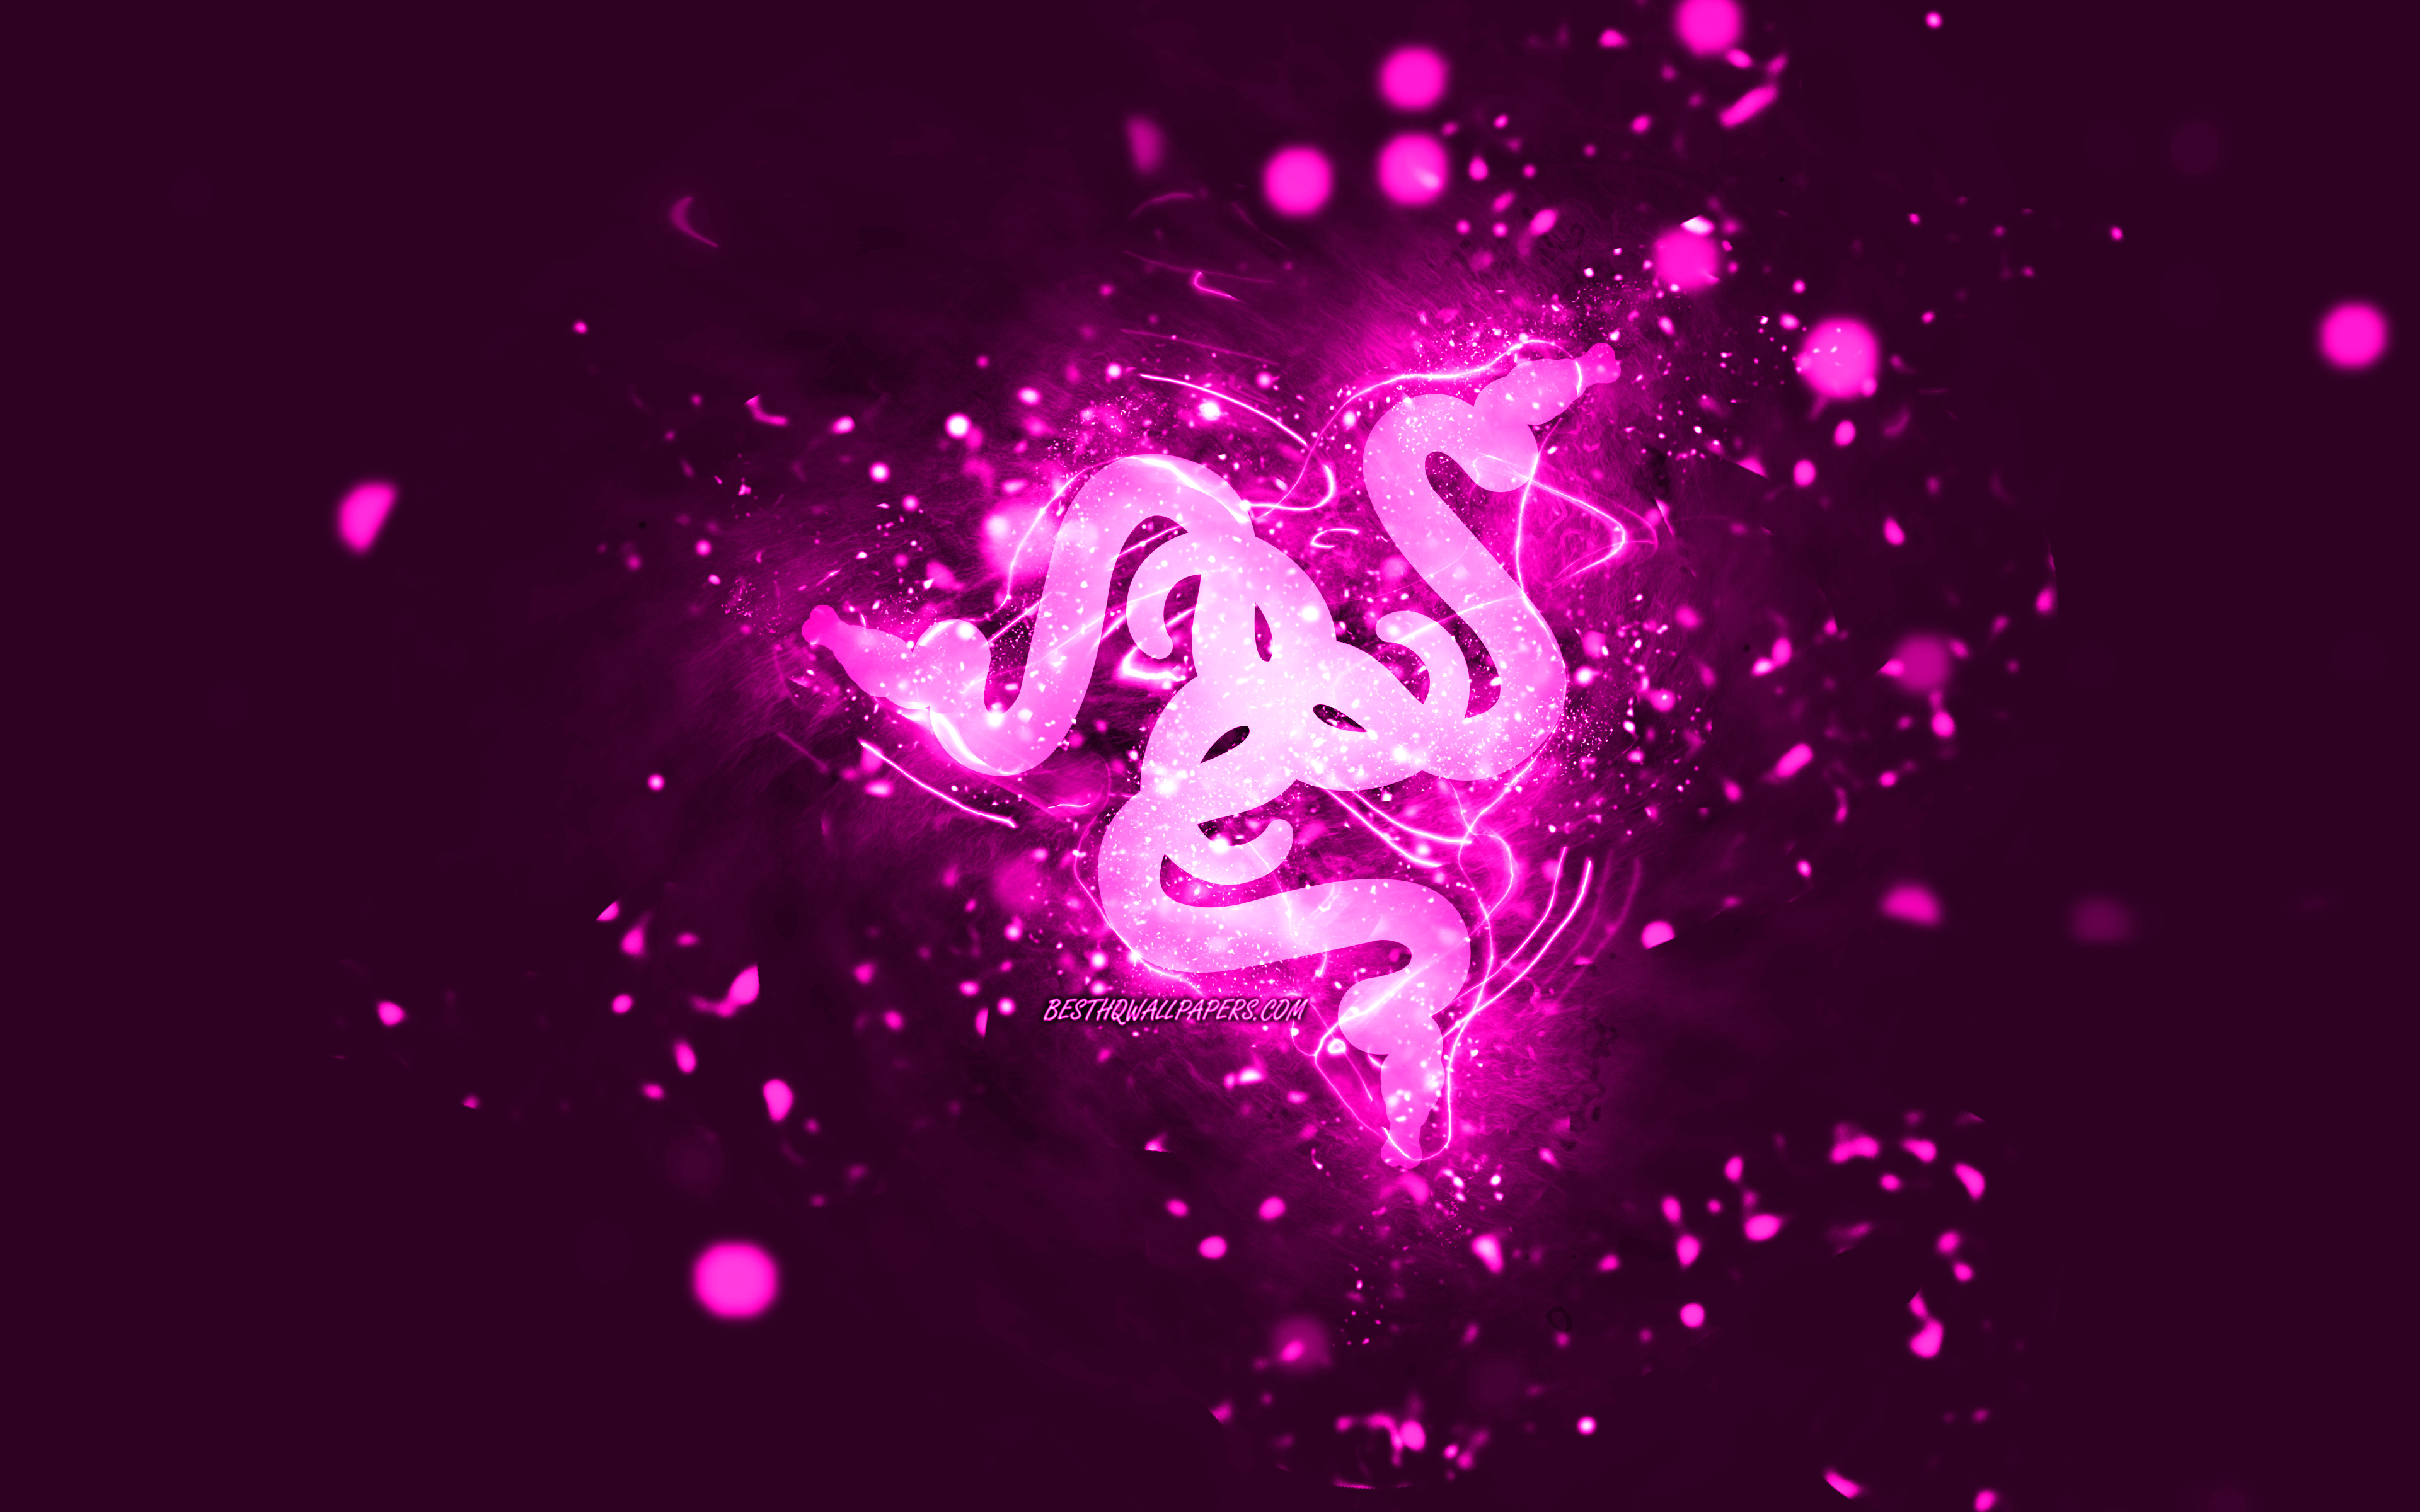 Download Wallpapers Razer Purple Logo 4k Purple Neon Lights Creative Turquoise Abstract Background Razer Logo Brands Razer For Desktop With Resolution 3840x2400 High Quality Hd Pictures Wallpapers